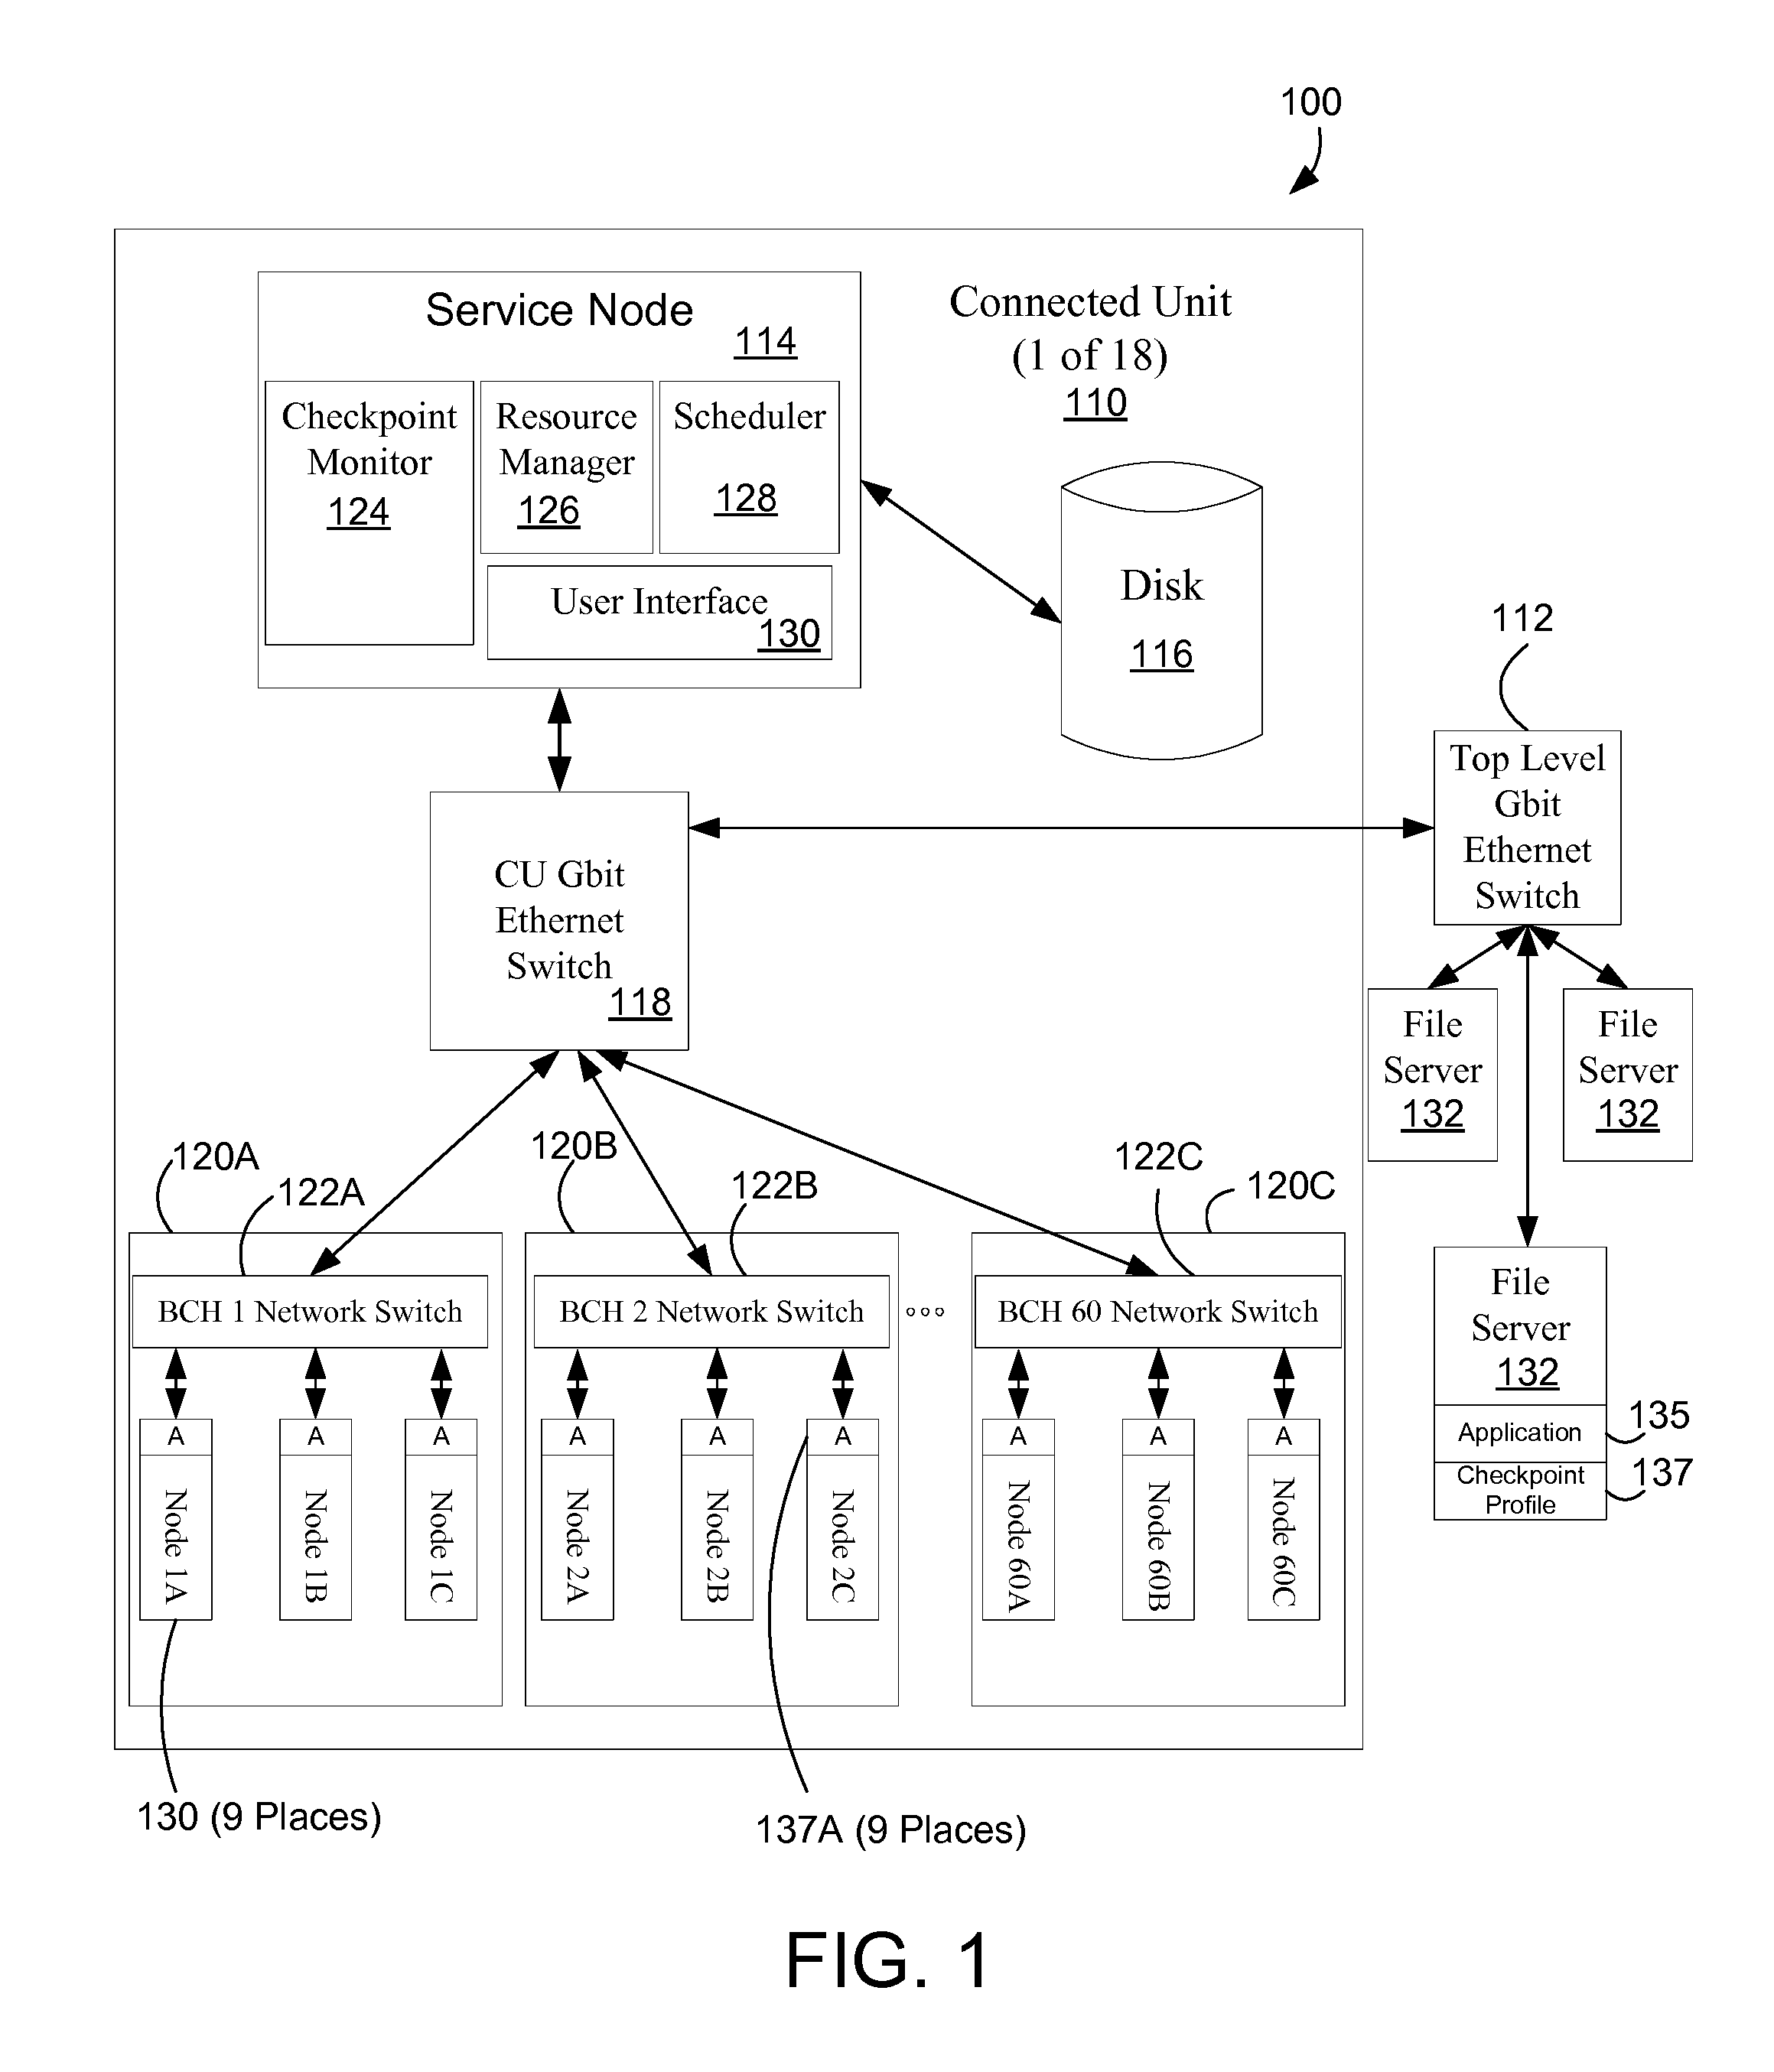 Scheduling Work in a Multi-Node Computer System Based on Checkpoint Characteristics